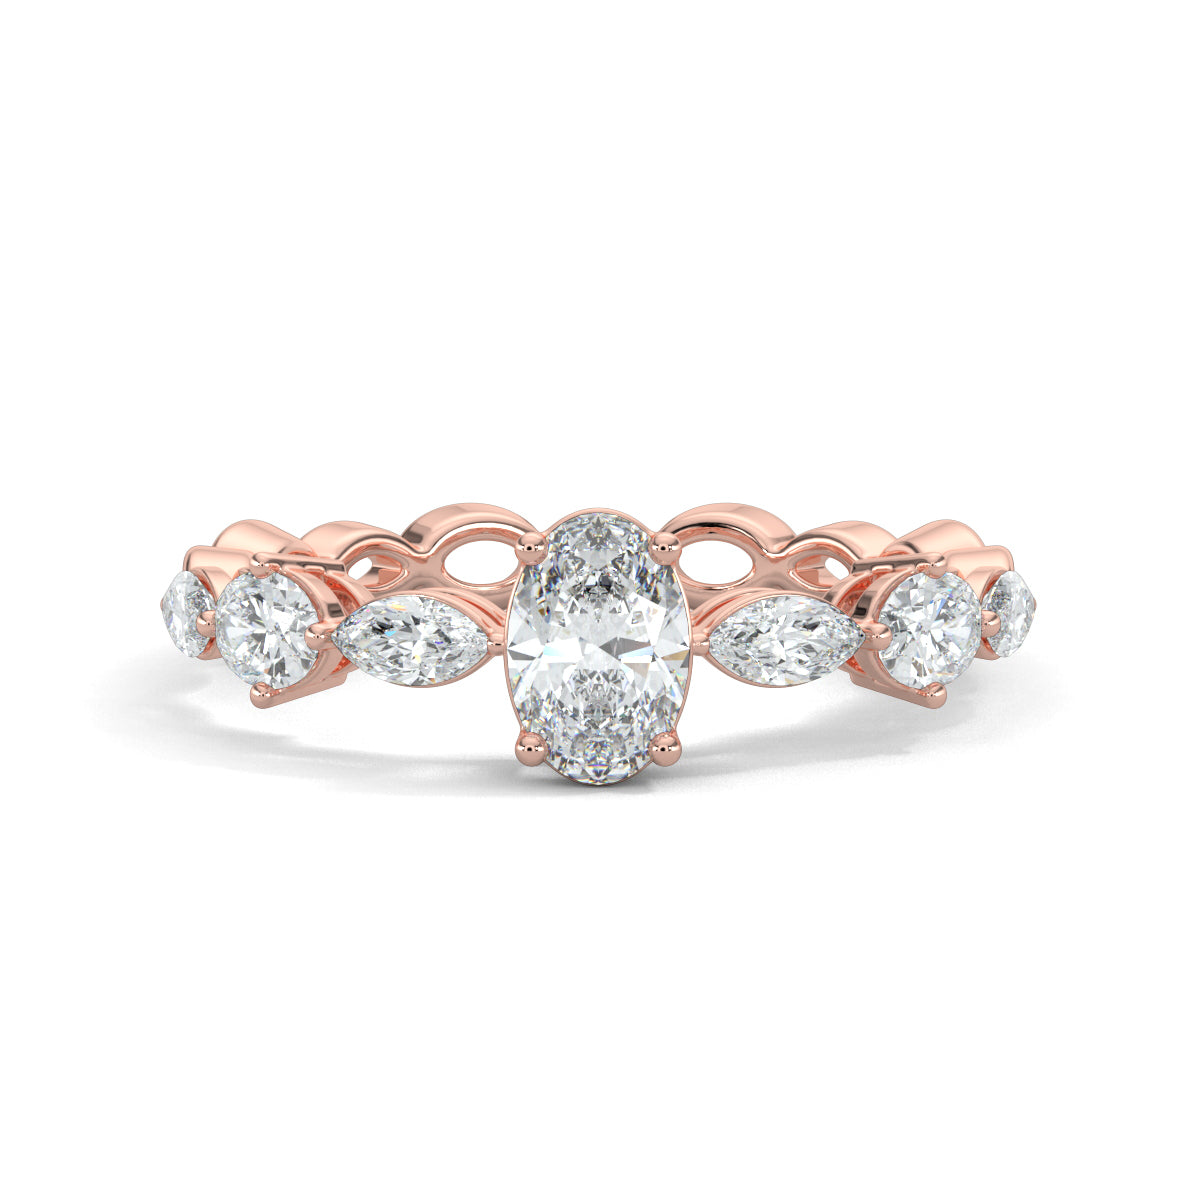 Rose Gold, Diamond Ring, Solstice Spectra eternity band, natural diamond band, Lab-grown diamond band, Oval solitaire ring, Marquise diamond accents, Accent band ring, Diamond jewelry